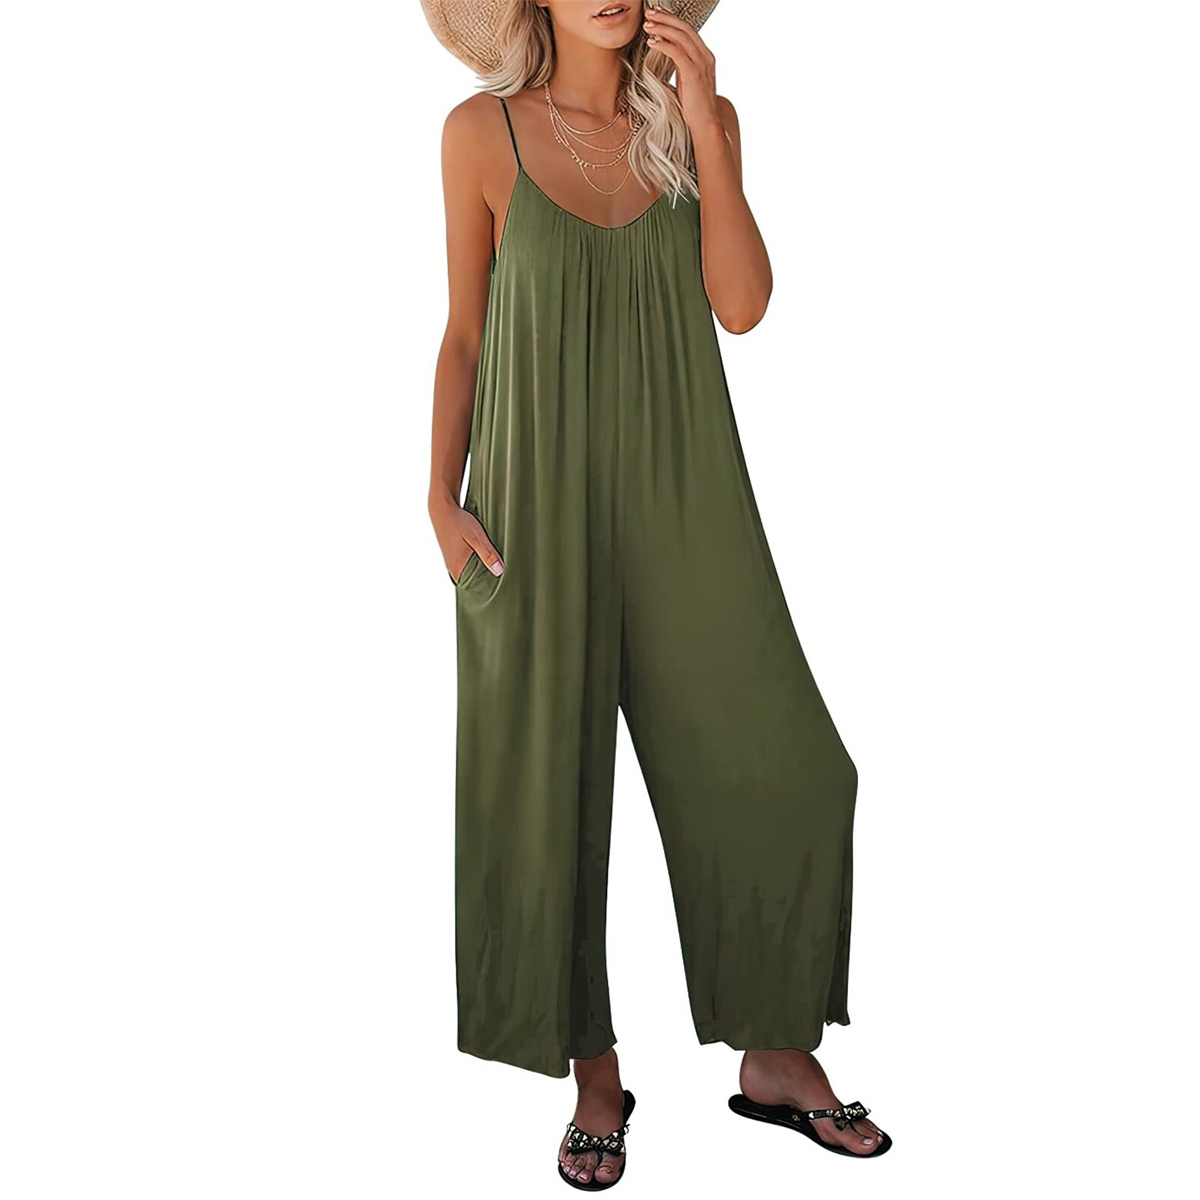 Casual Loose Jumpsuit Women Summer Spaghetti Strap Sleeveless Stretchy Wide Leg Rompers with Pockets Oversized Jumpsuits